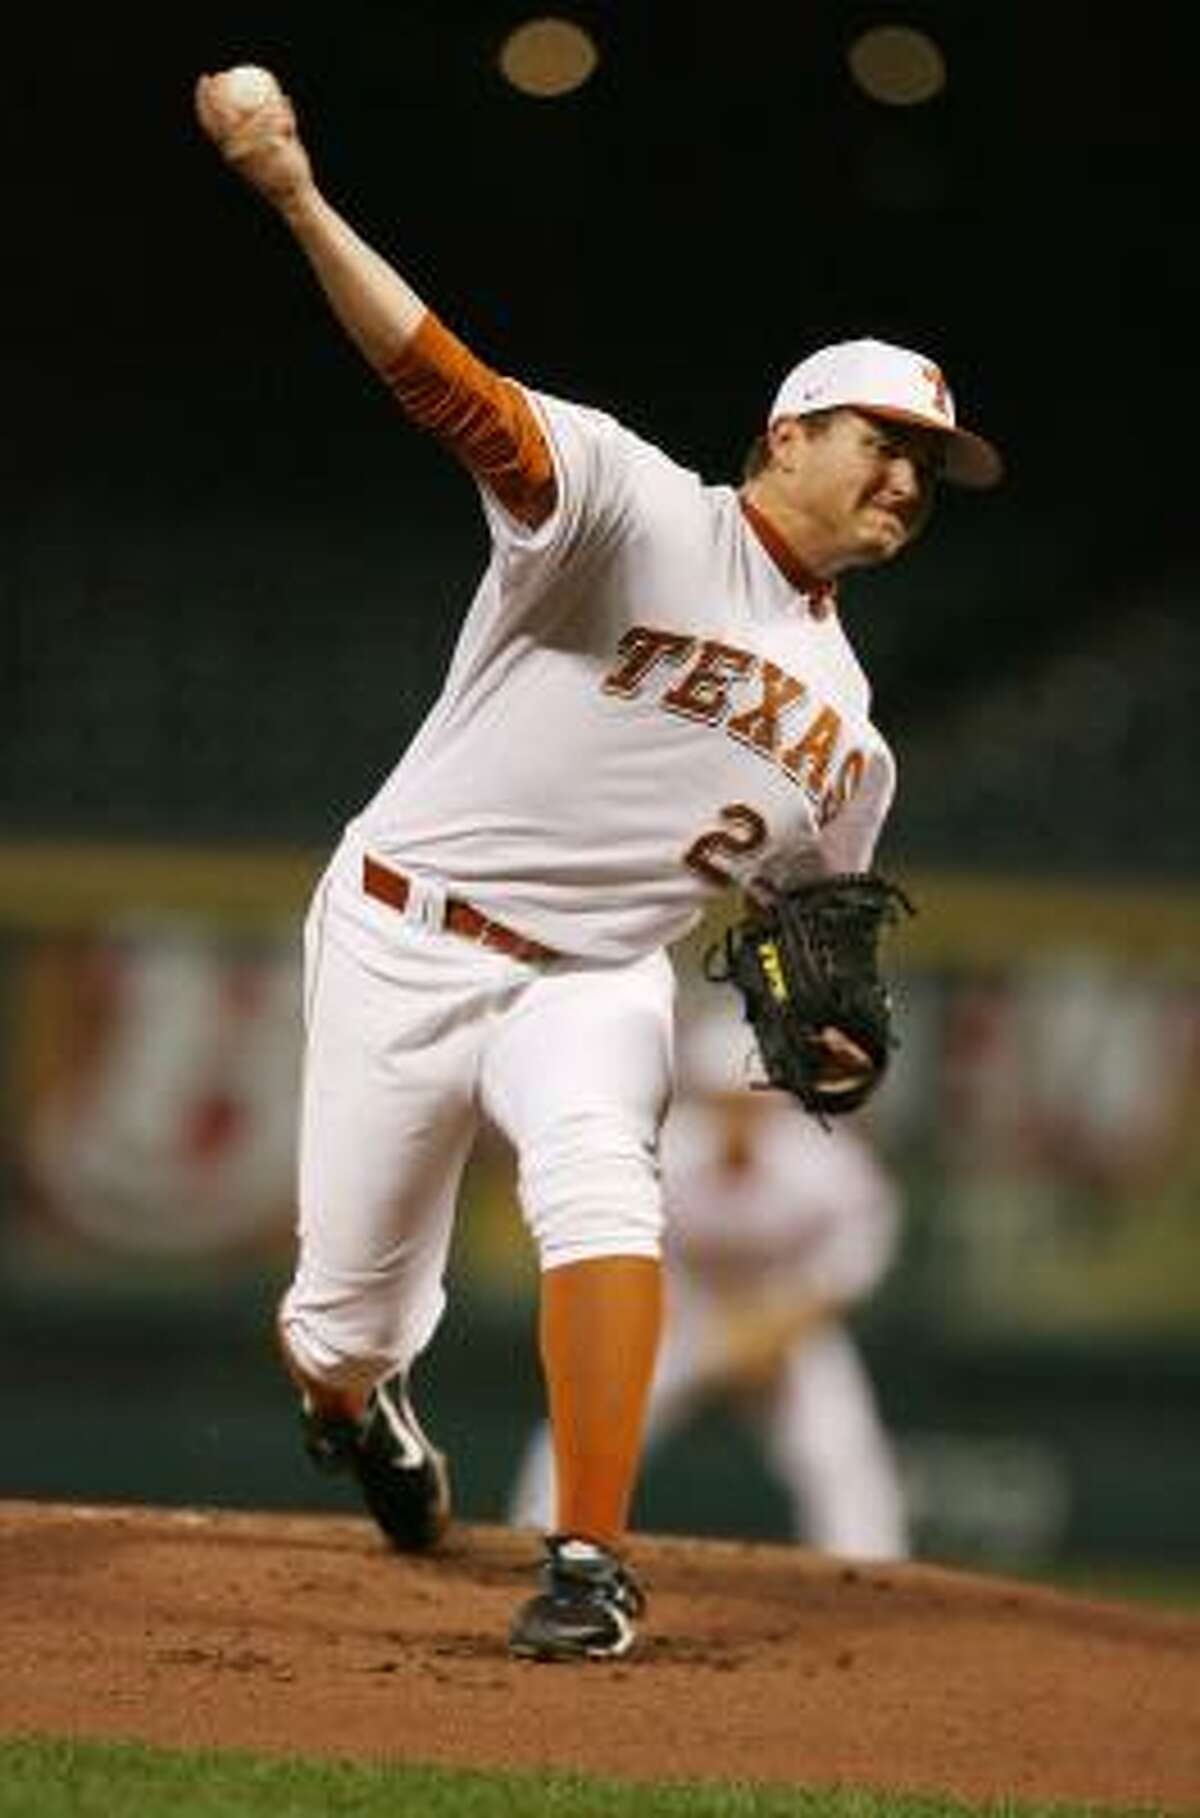 Texas starter Cole Green recently worked 30 2/3 scoreless innings and holds a record of 9-0.